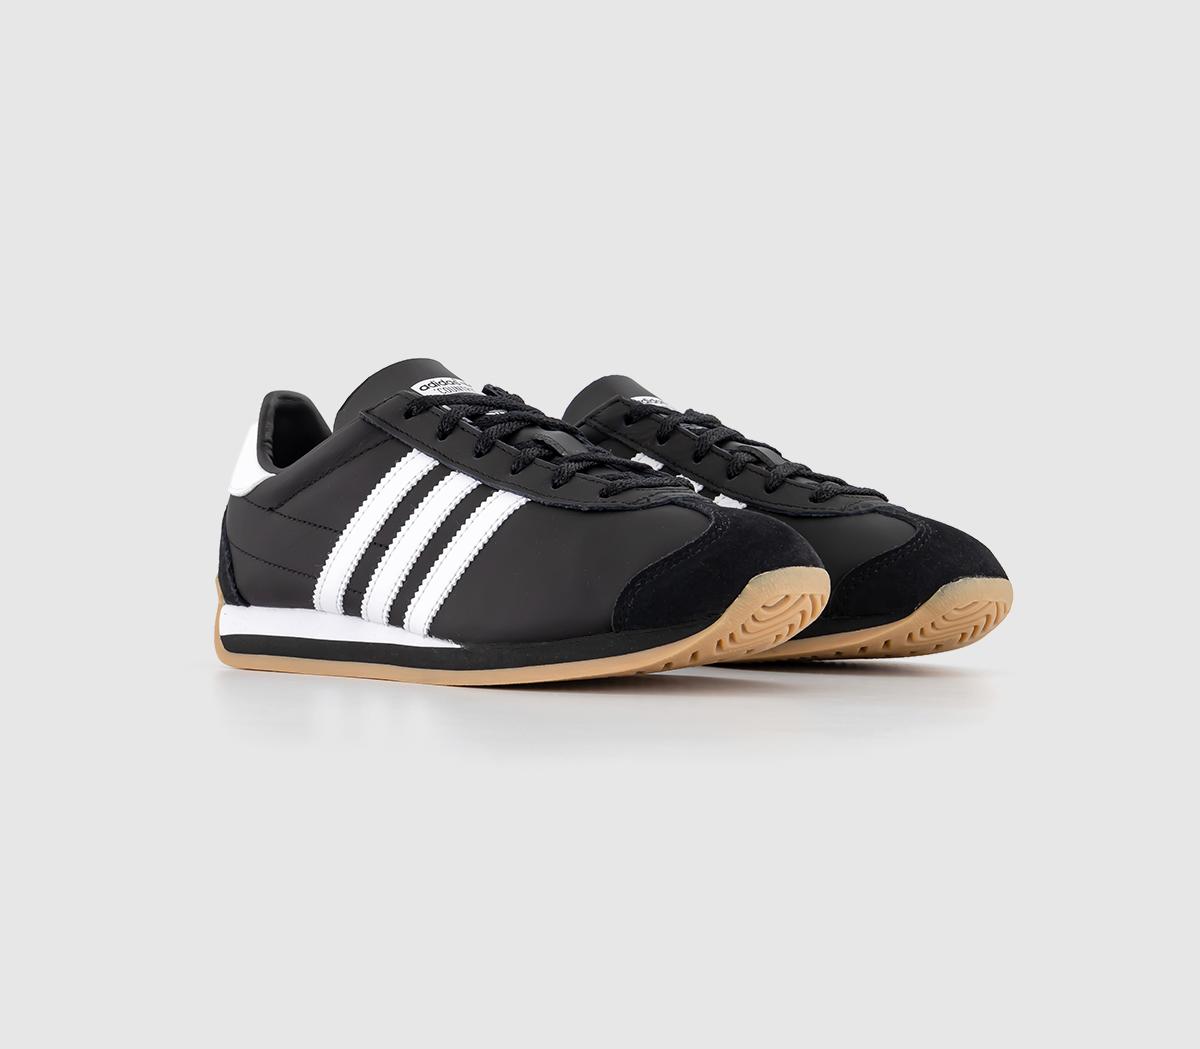 Adidas Country Og Trainers Core Black Core Black White Leather, 7